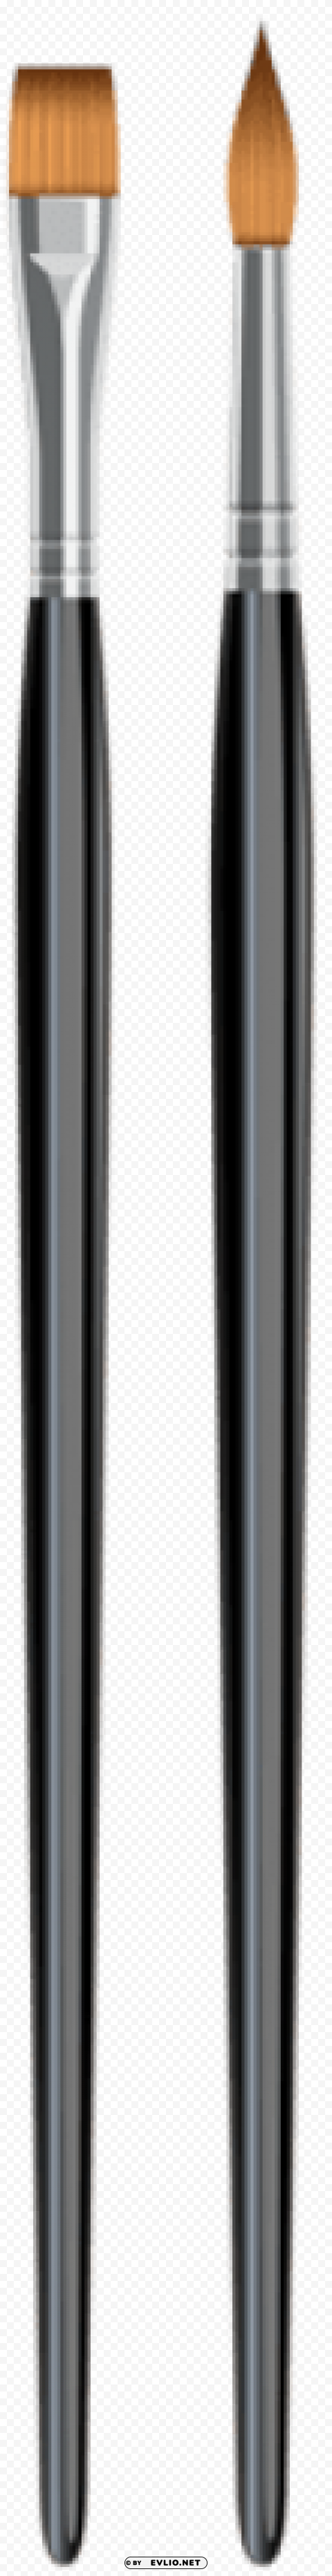 paint brushes PNG for use